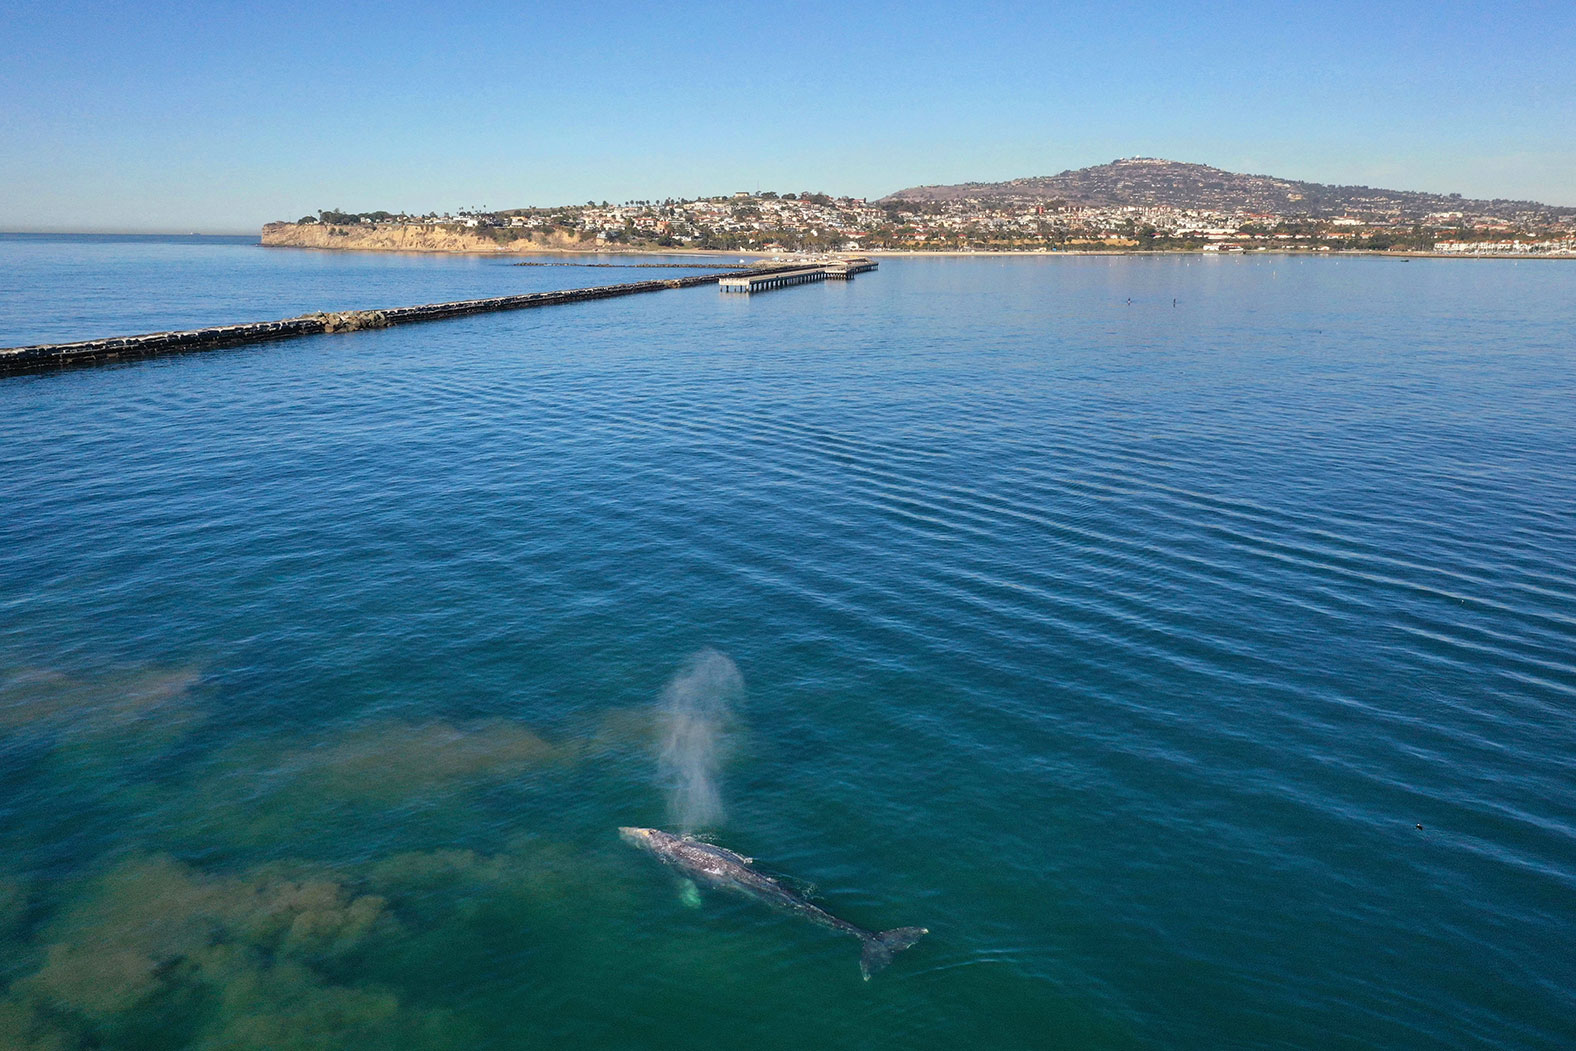 A gray whale swims into Los Angeles Harbor on Feb. 23, 2021. It’s not unusual for gray whales to stay in the harbor for a few weeks in February and March before migrating farther north toward Alaska.